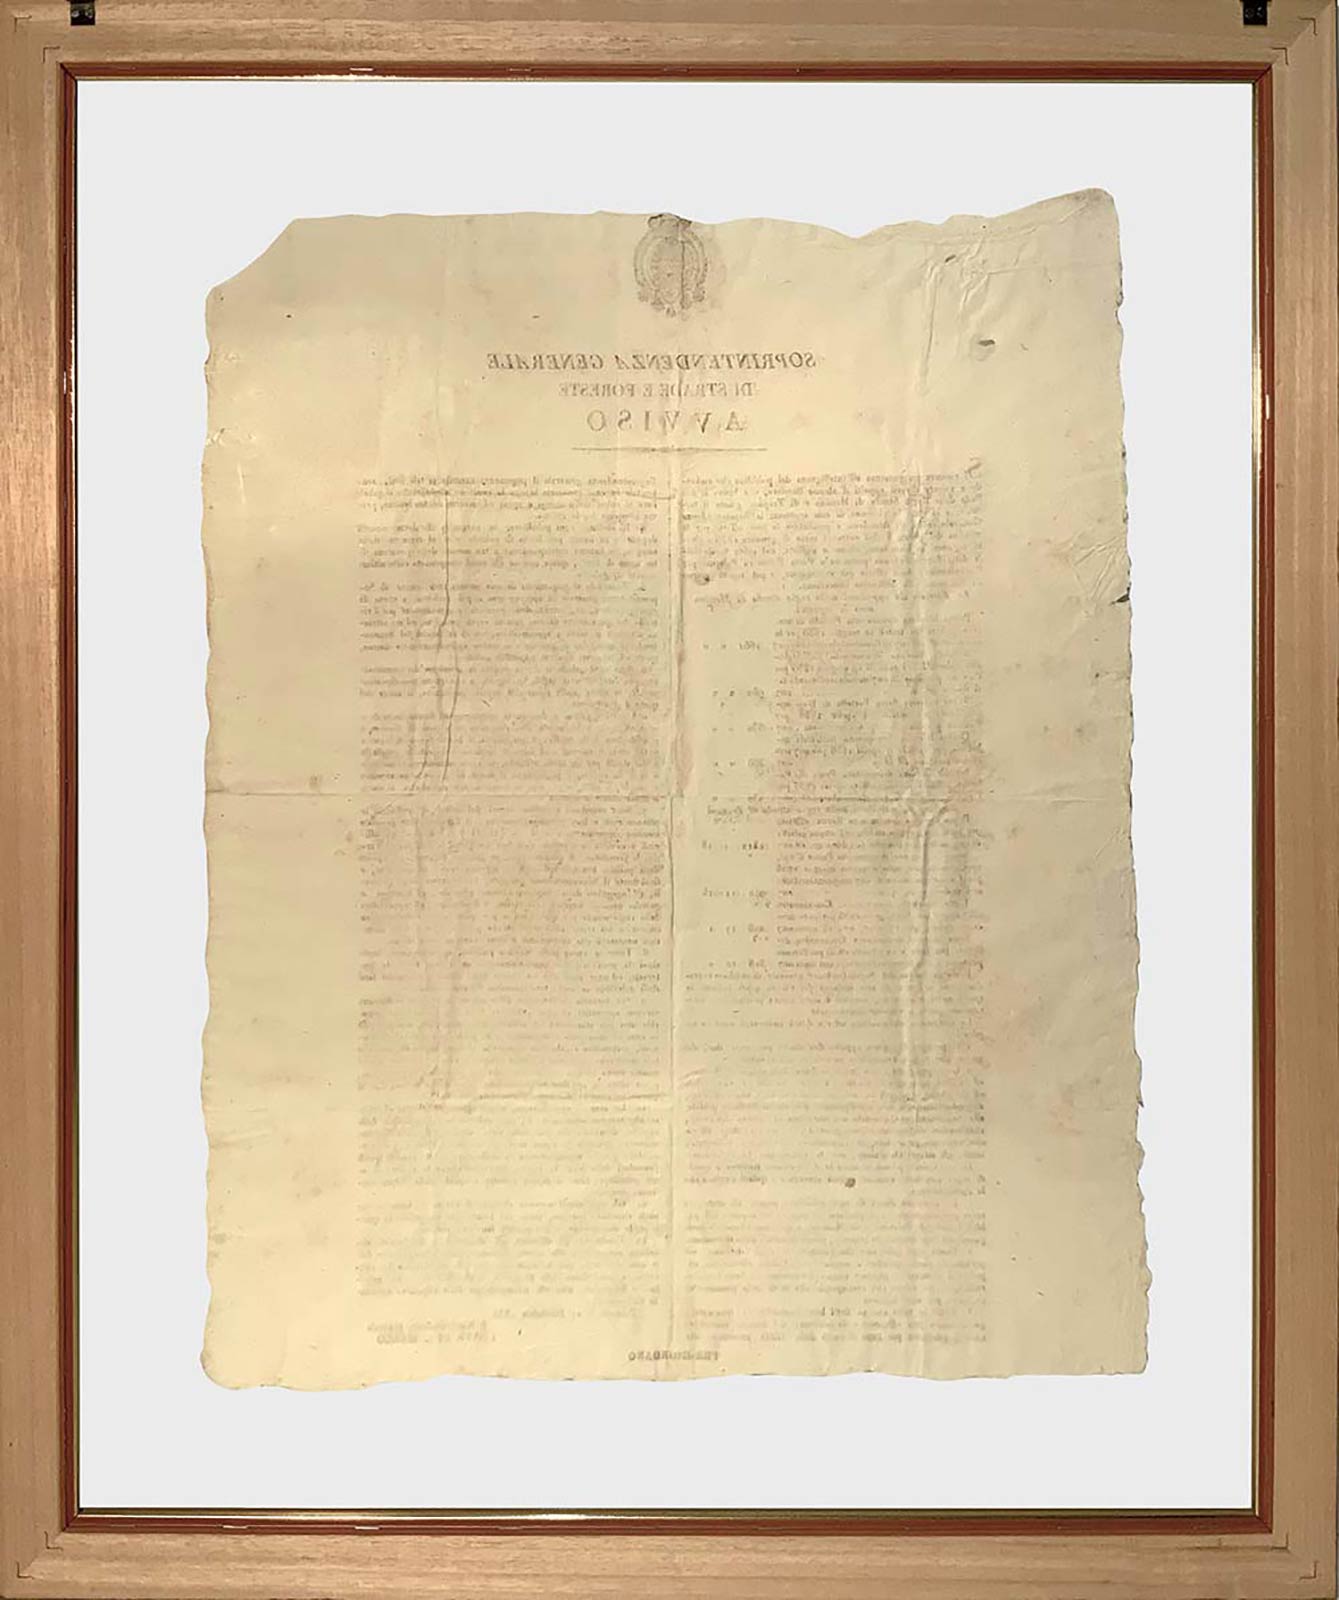 General Superintendent of the Decree of roads and forests, Notice. Palermo, 21 December 1835. Cm - Image 3 of 3